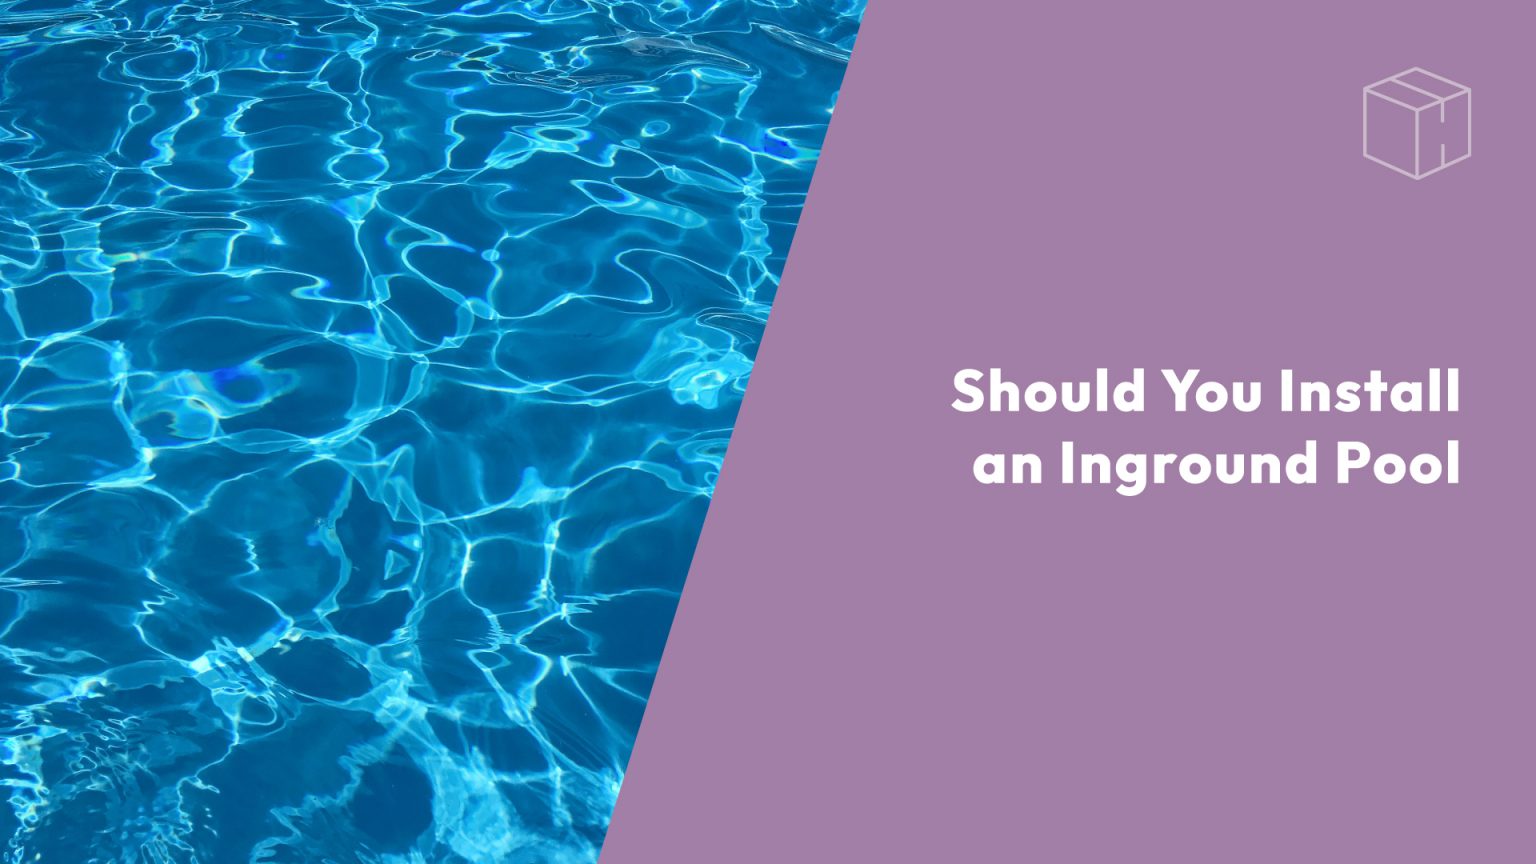 Should You Install An Inground Pool?